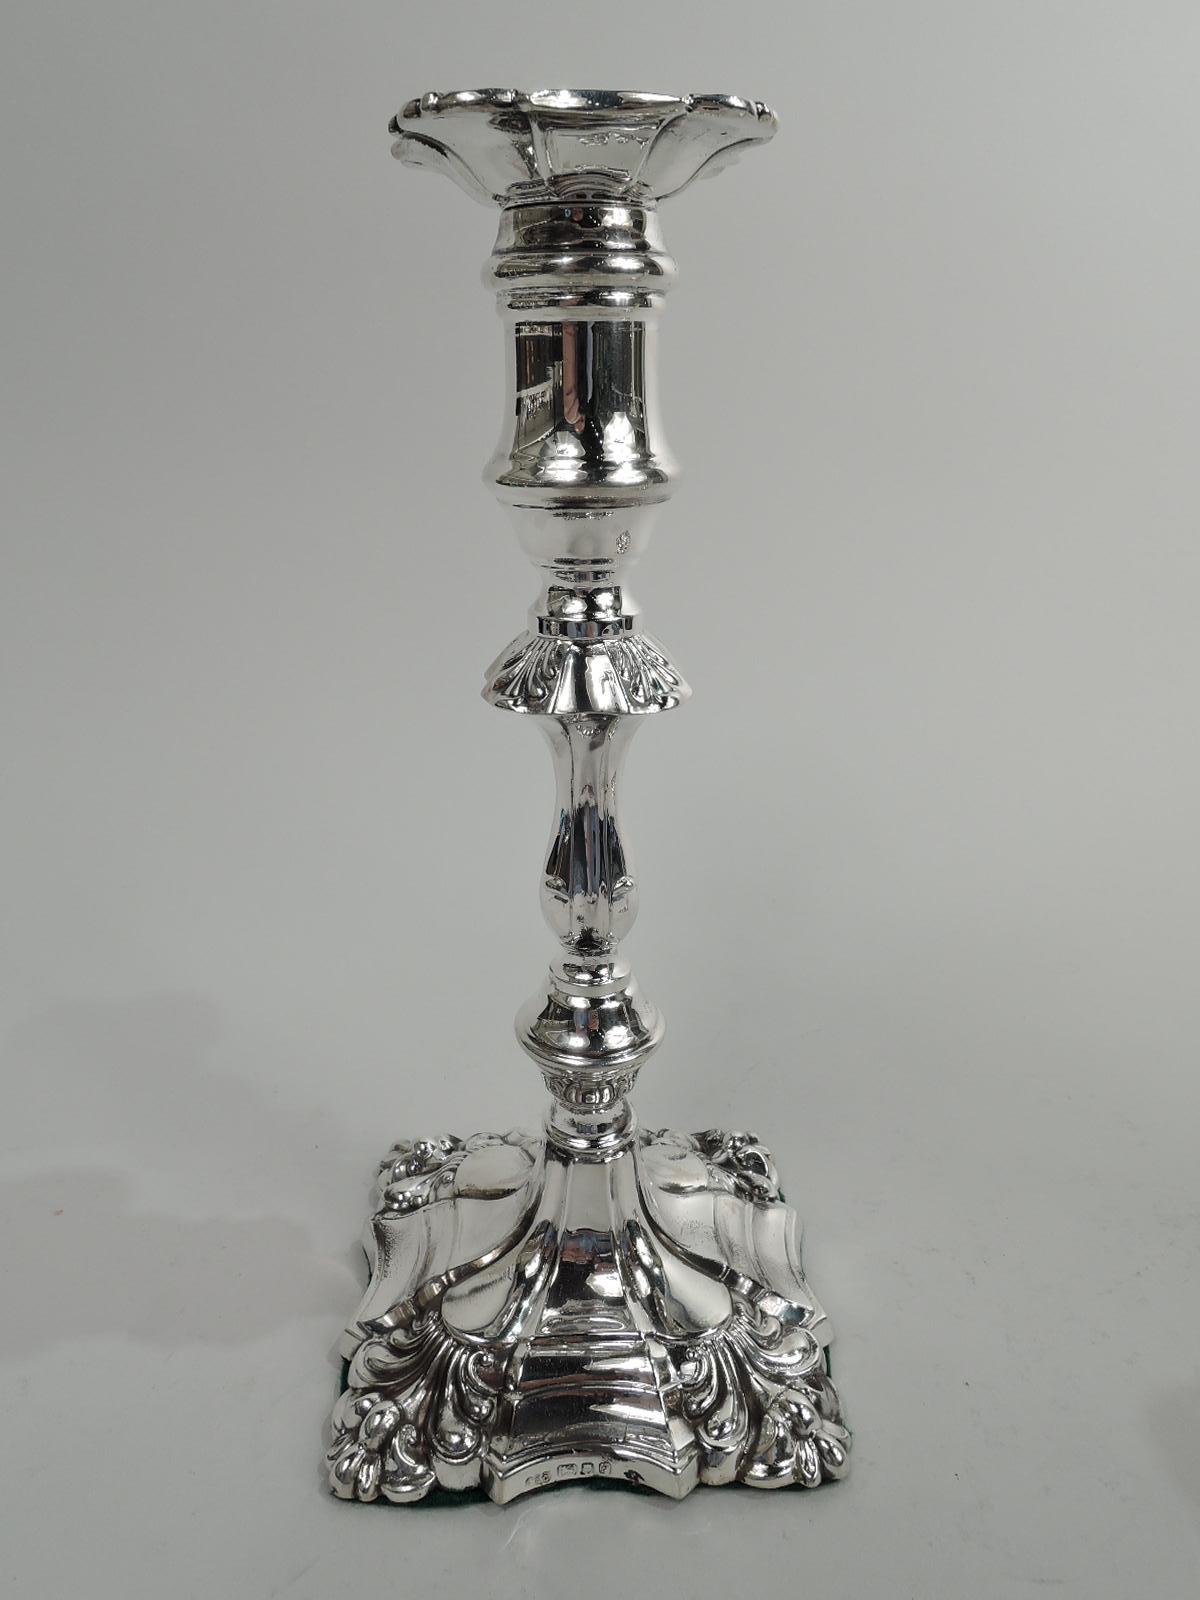 Pair of English Georgian Rococo sterling silver candlesticks, 1961. Each: Spool socket with detachable bobeche on knopped and baluster shaft with alternating lobes and flutes on stepped square foot with same. Corner leaf ornament. Fully marked